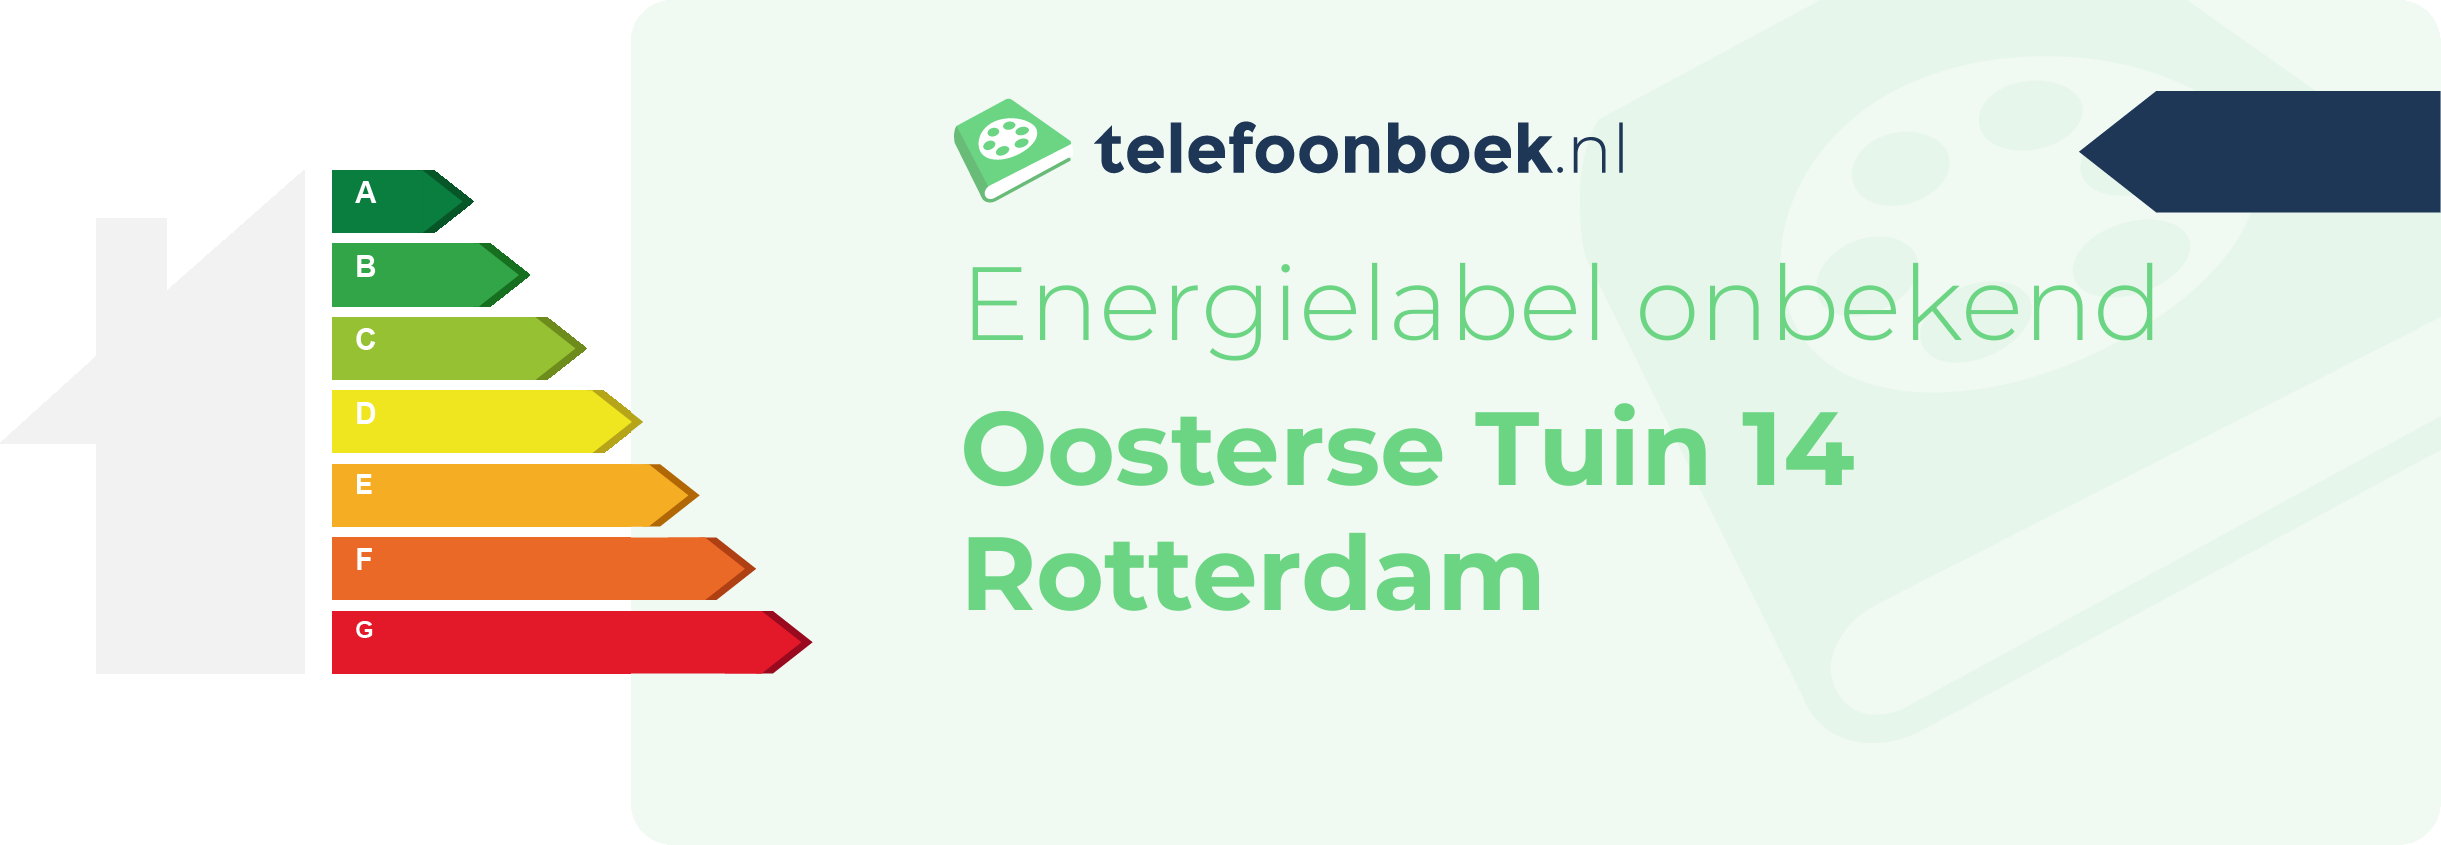 Energielabel Oosterse Tuin 14 Rotterdam